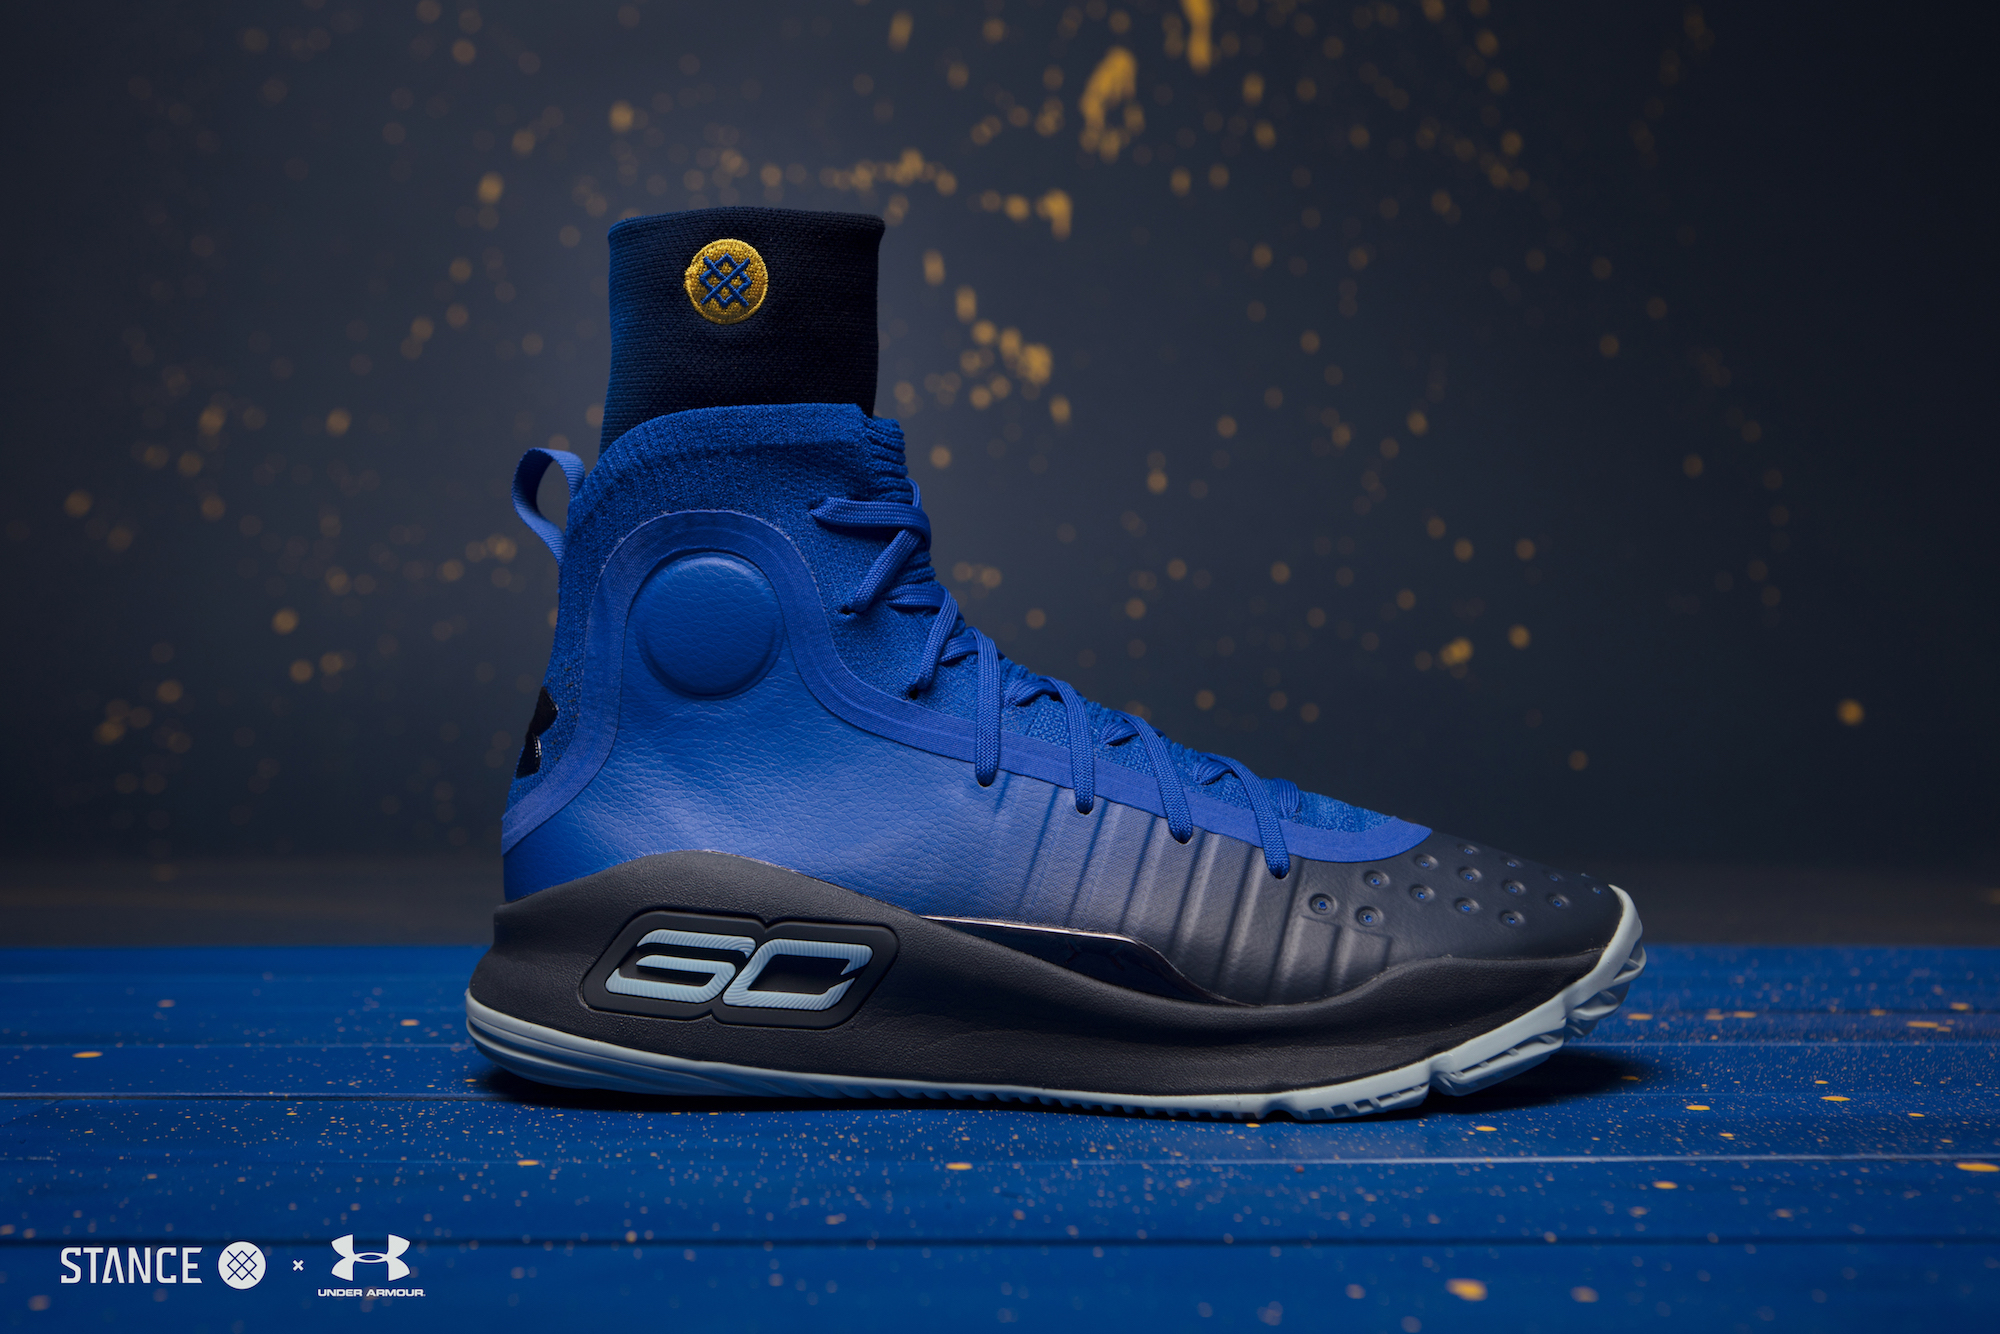 under armour Stance x Curry 4 Capsule socks 4